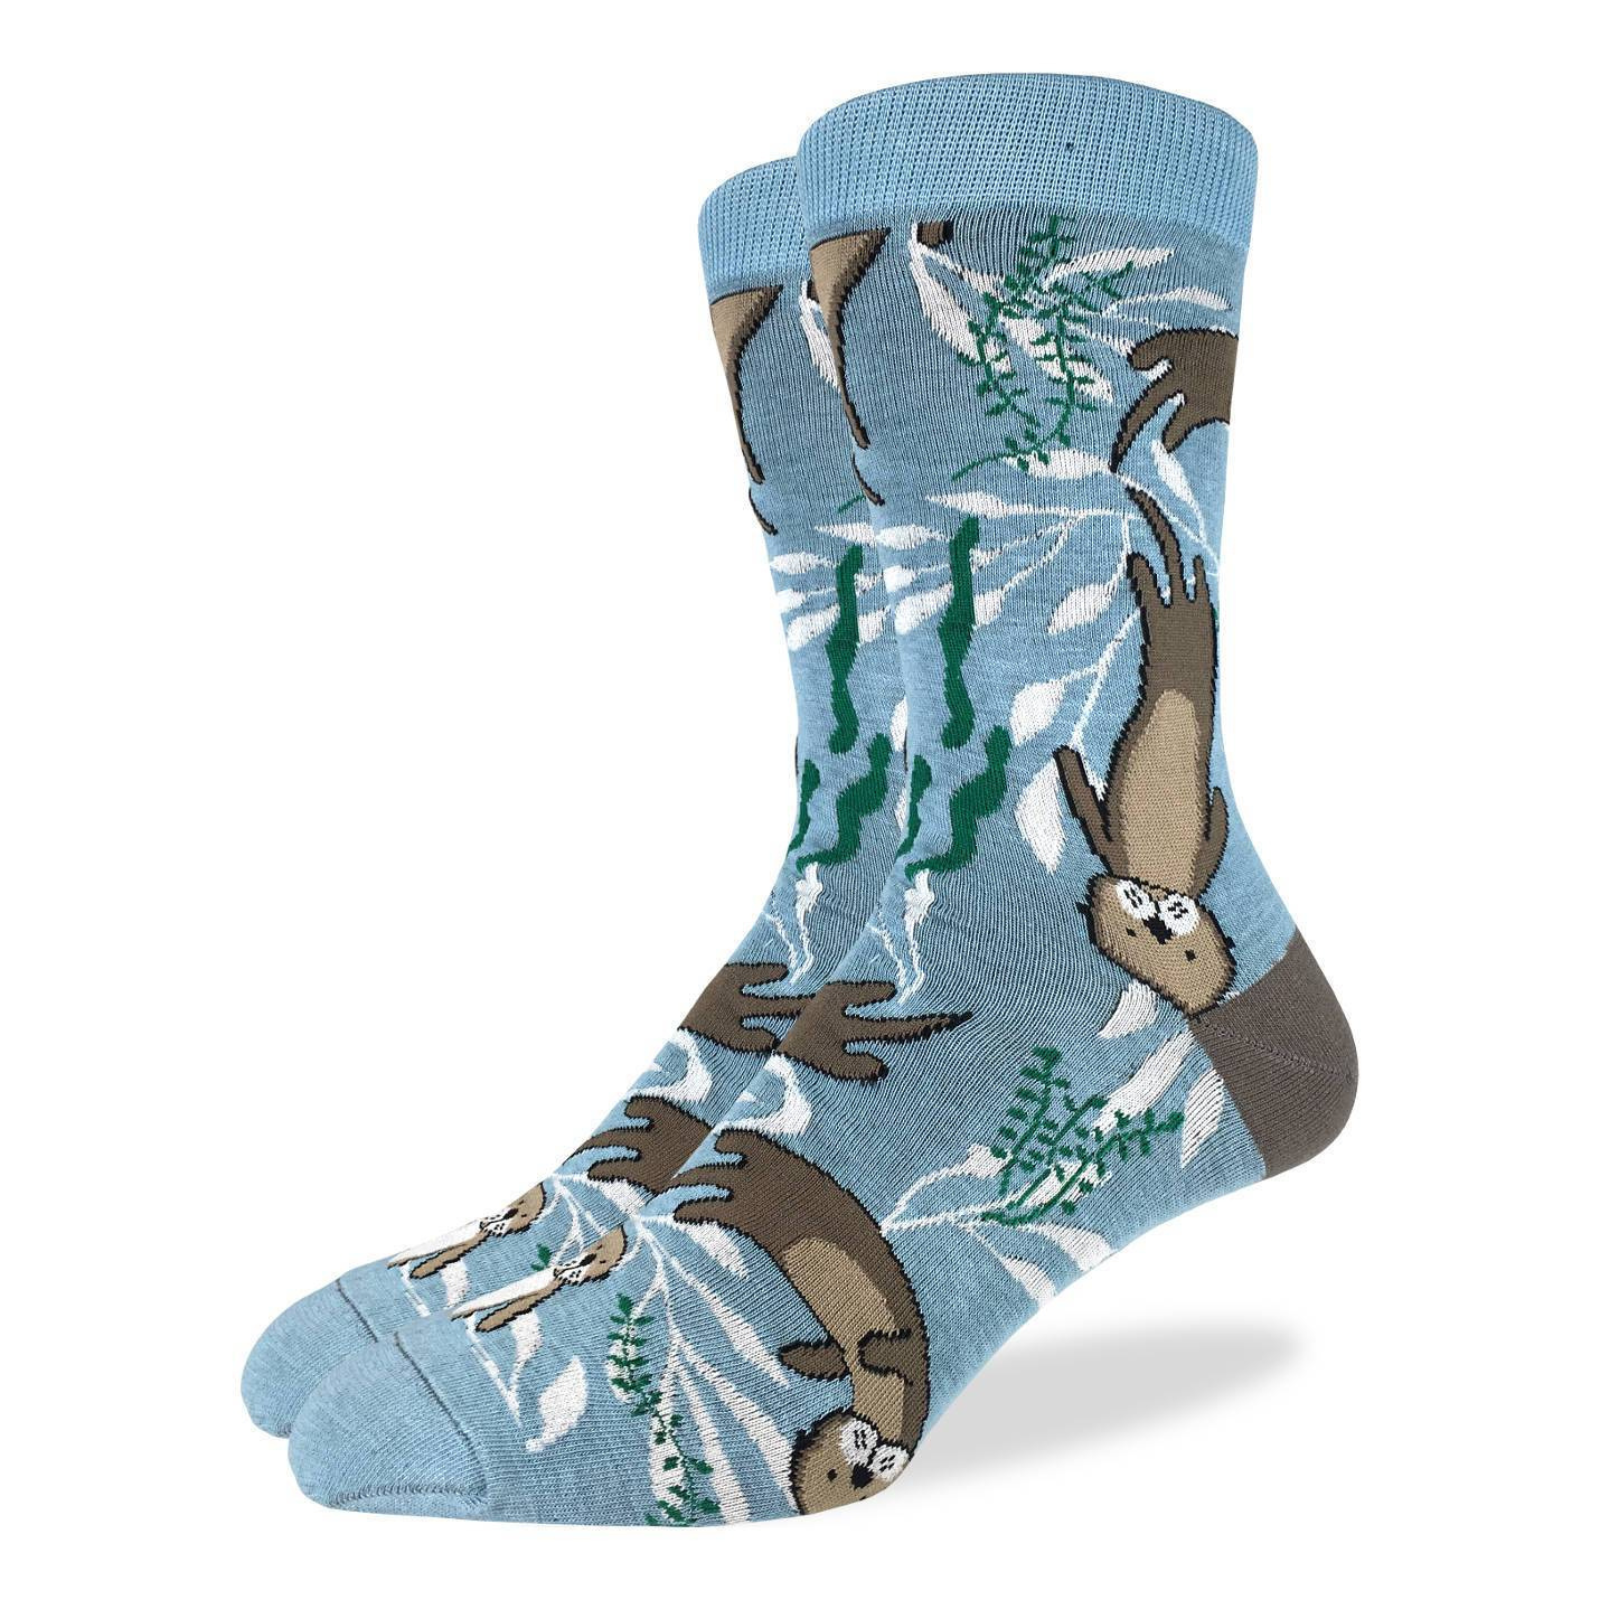 Good Luck Sock Sea Otter men's sock featuring blue sock with otters swimming with kelp